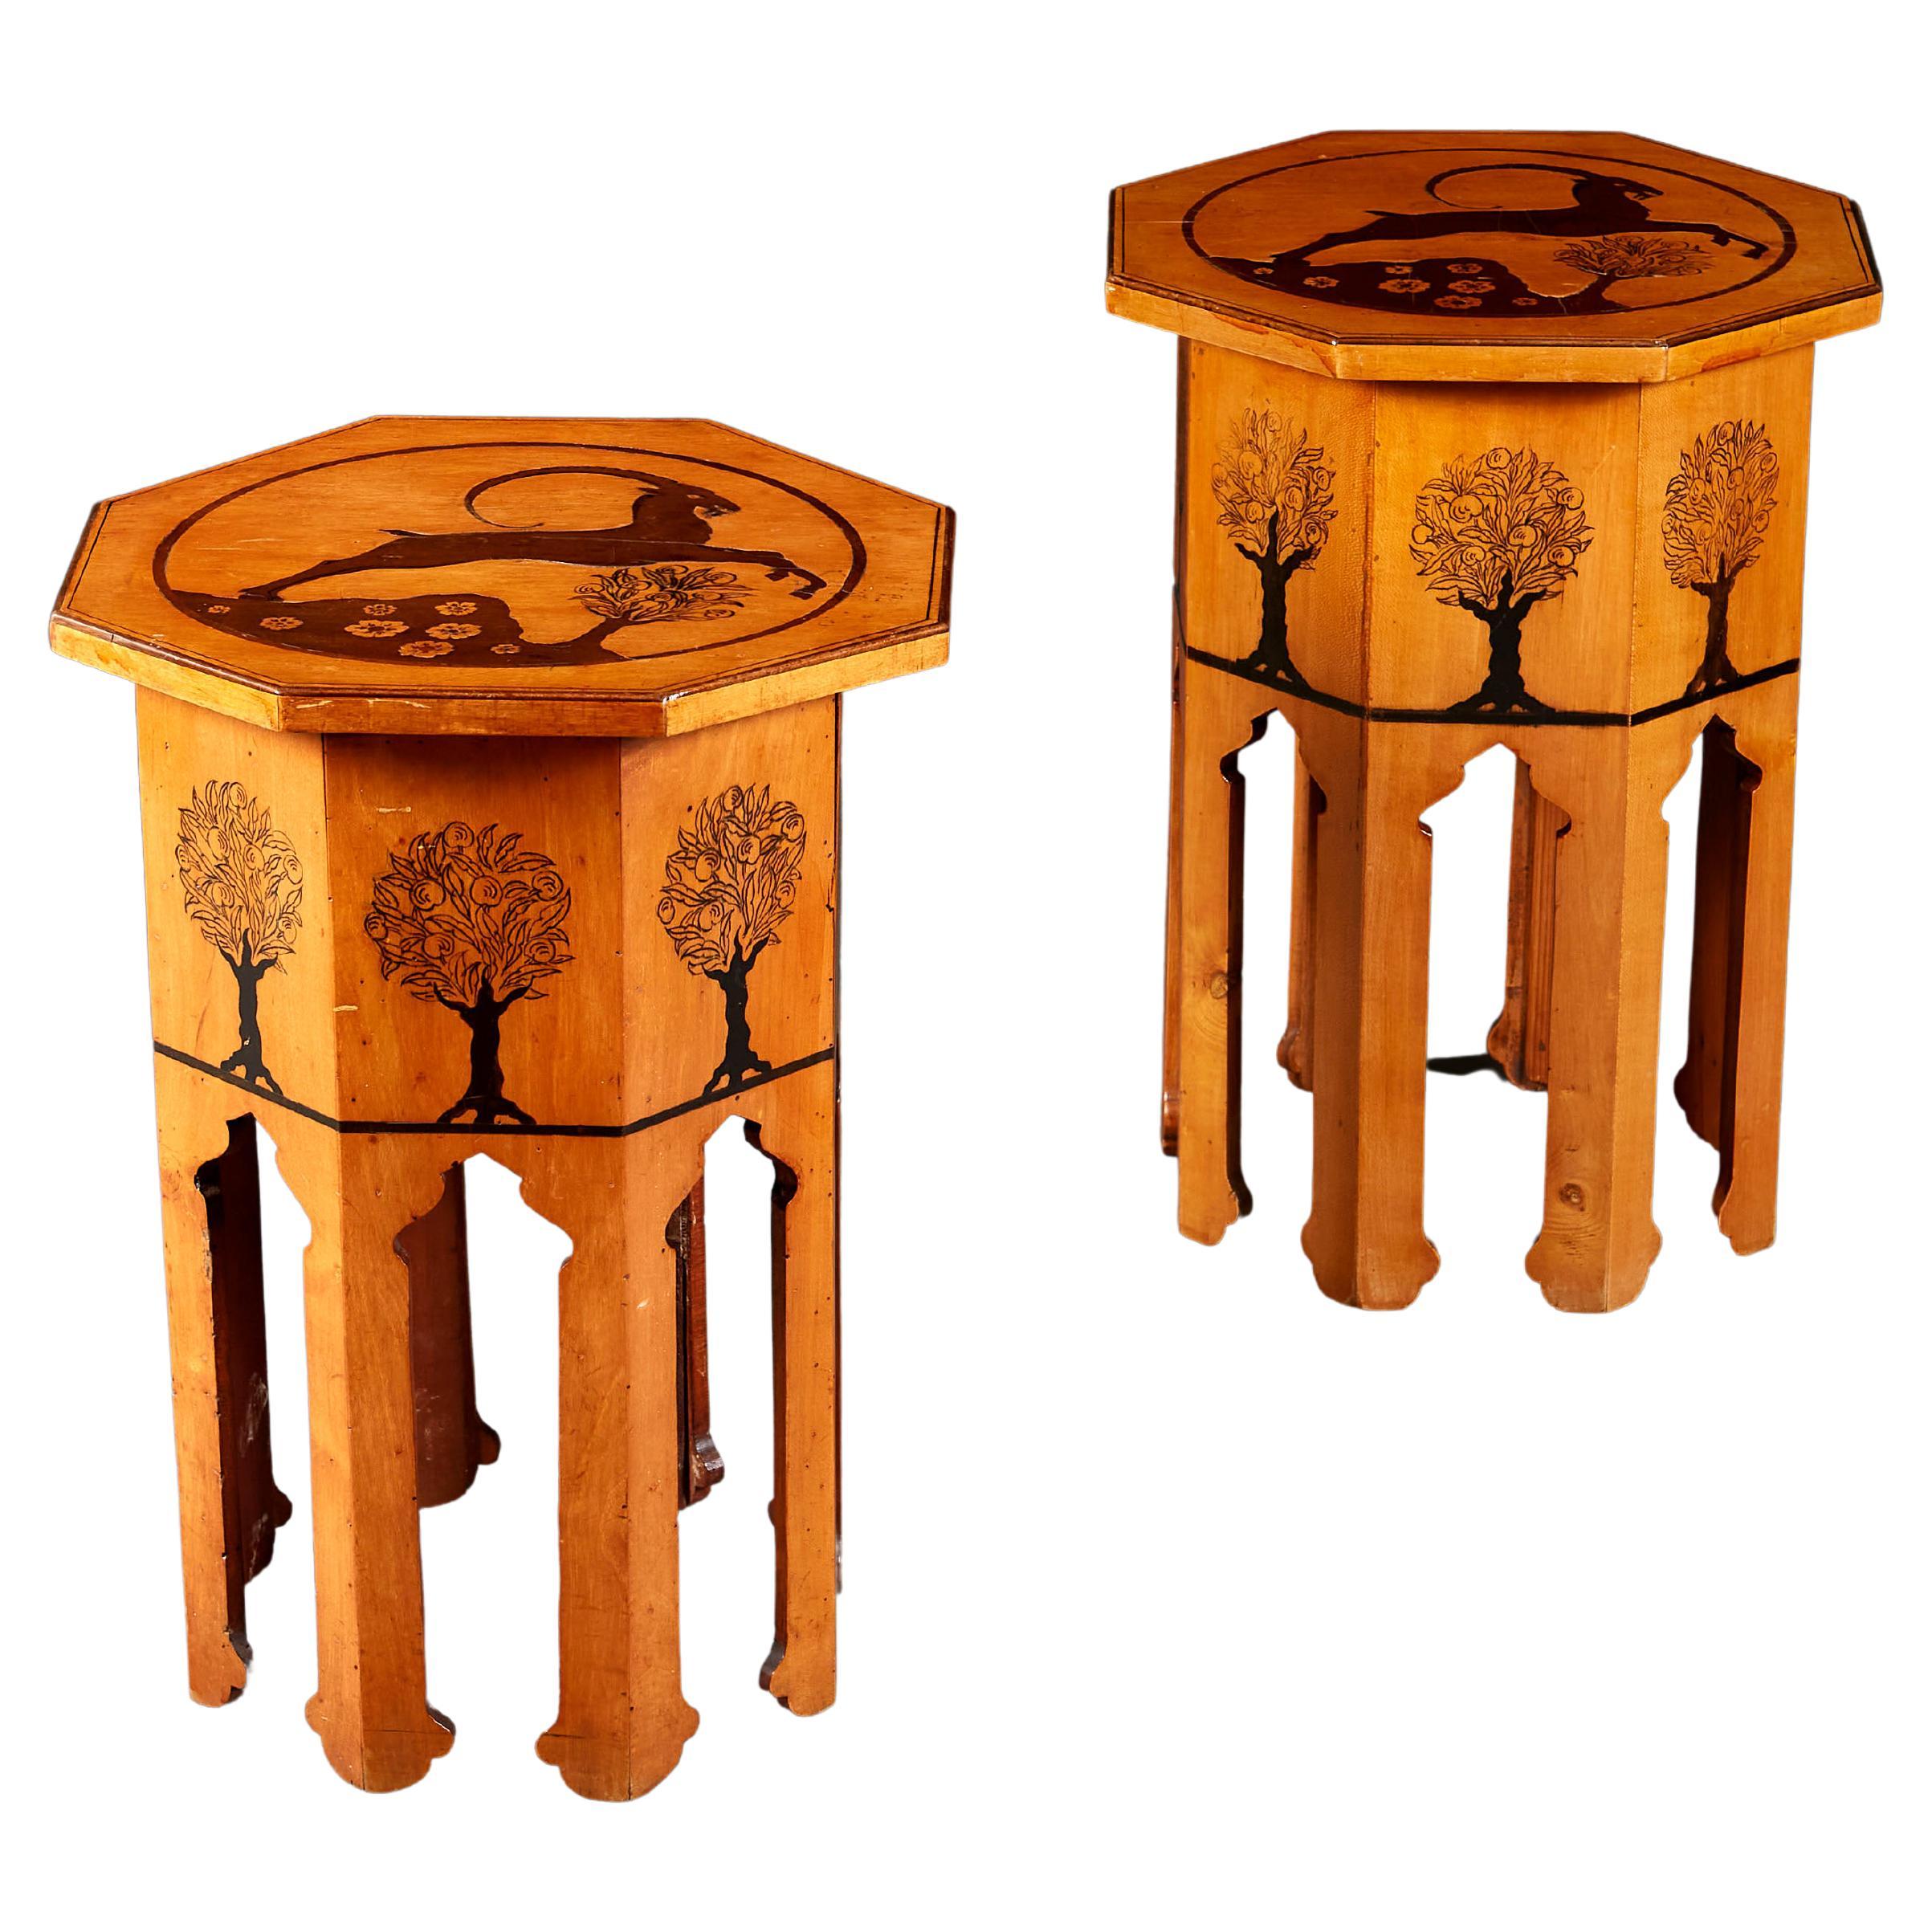 Pair of Moorish Occasional Tables After William de Morgan For Sale